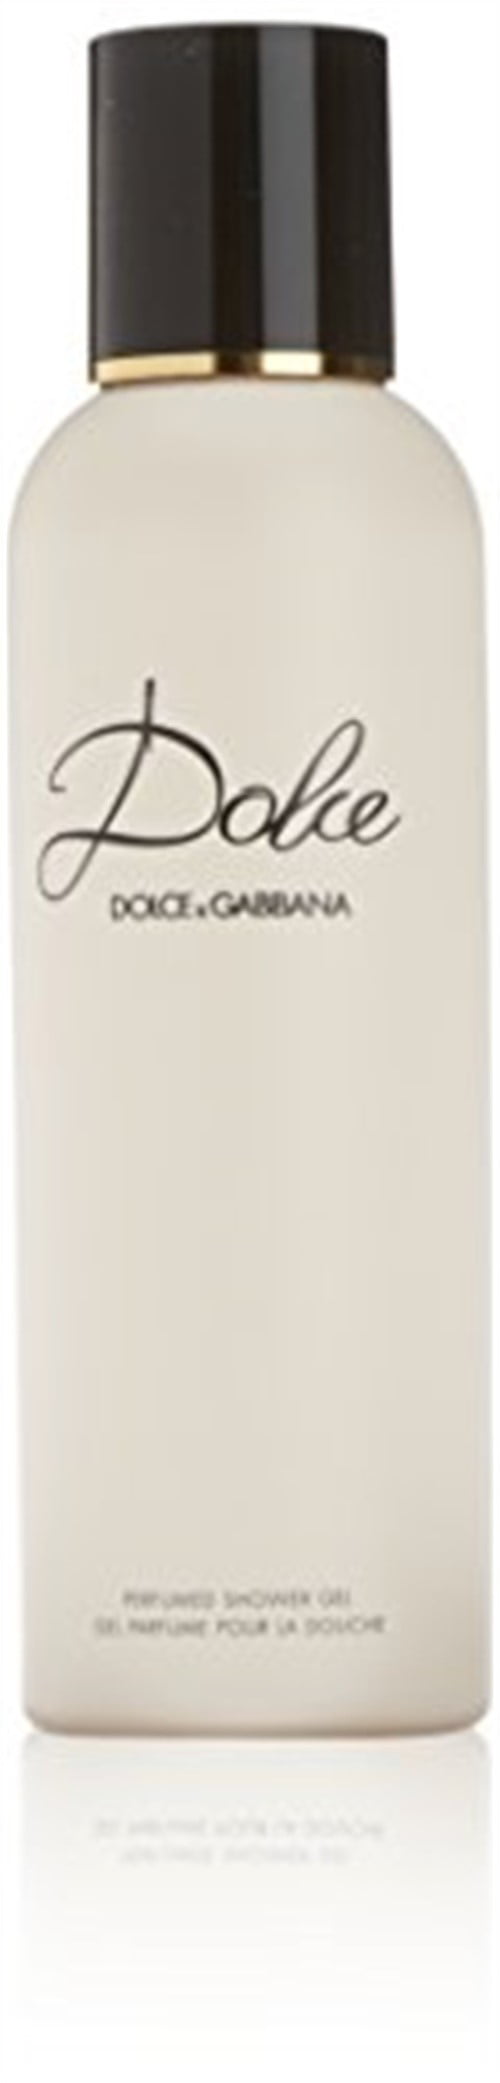 dolce and gabbana the one body wash